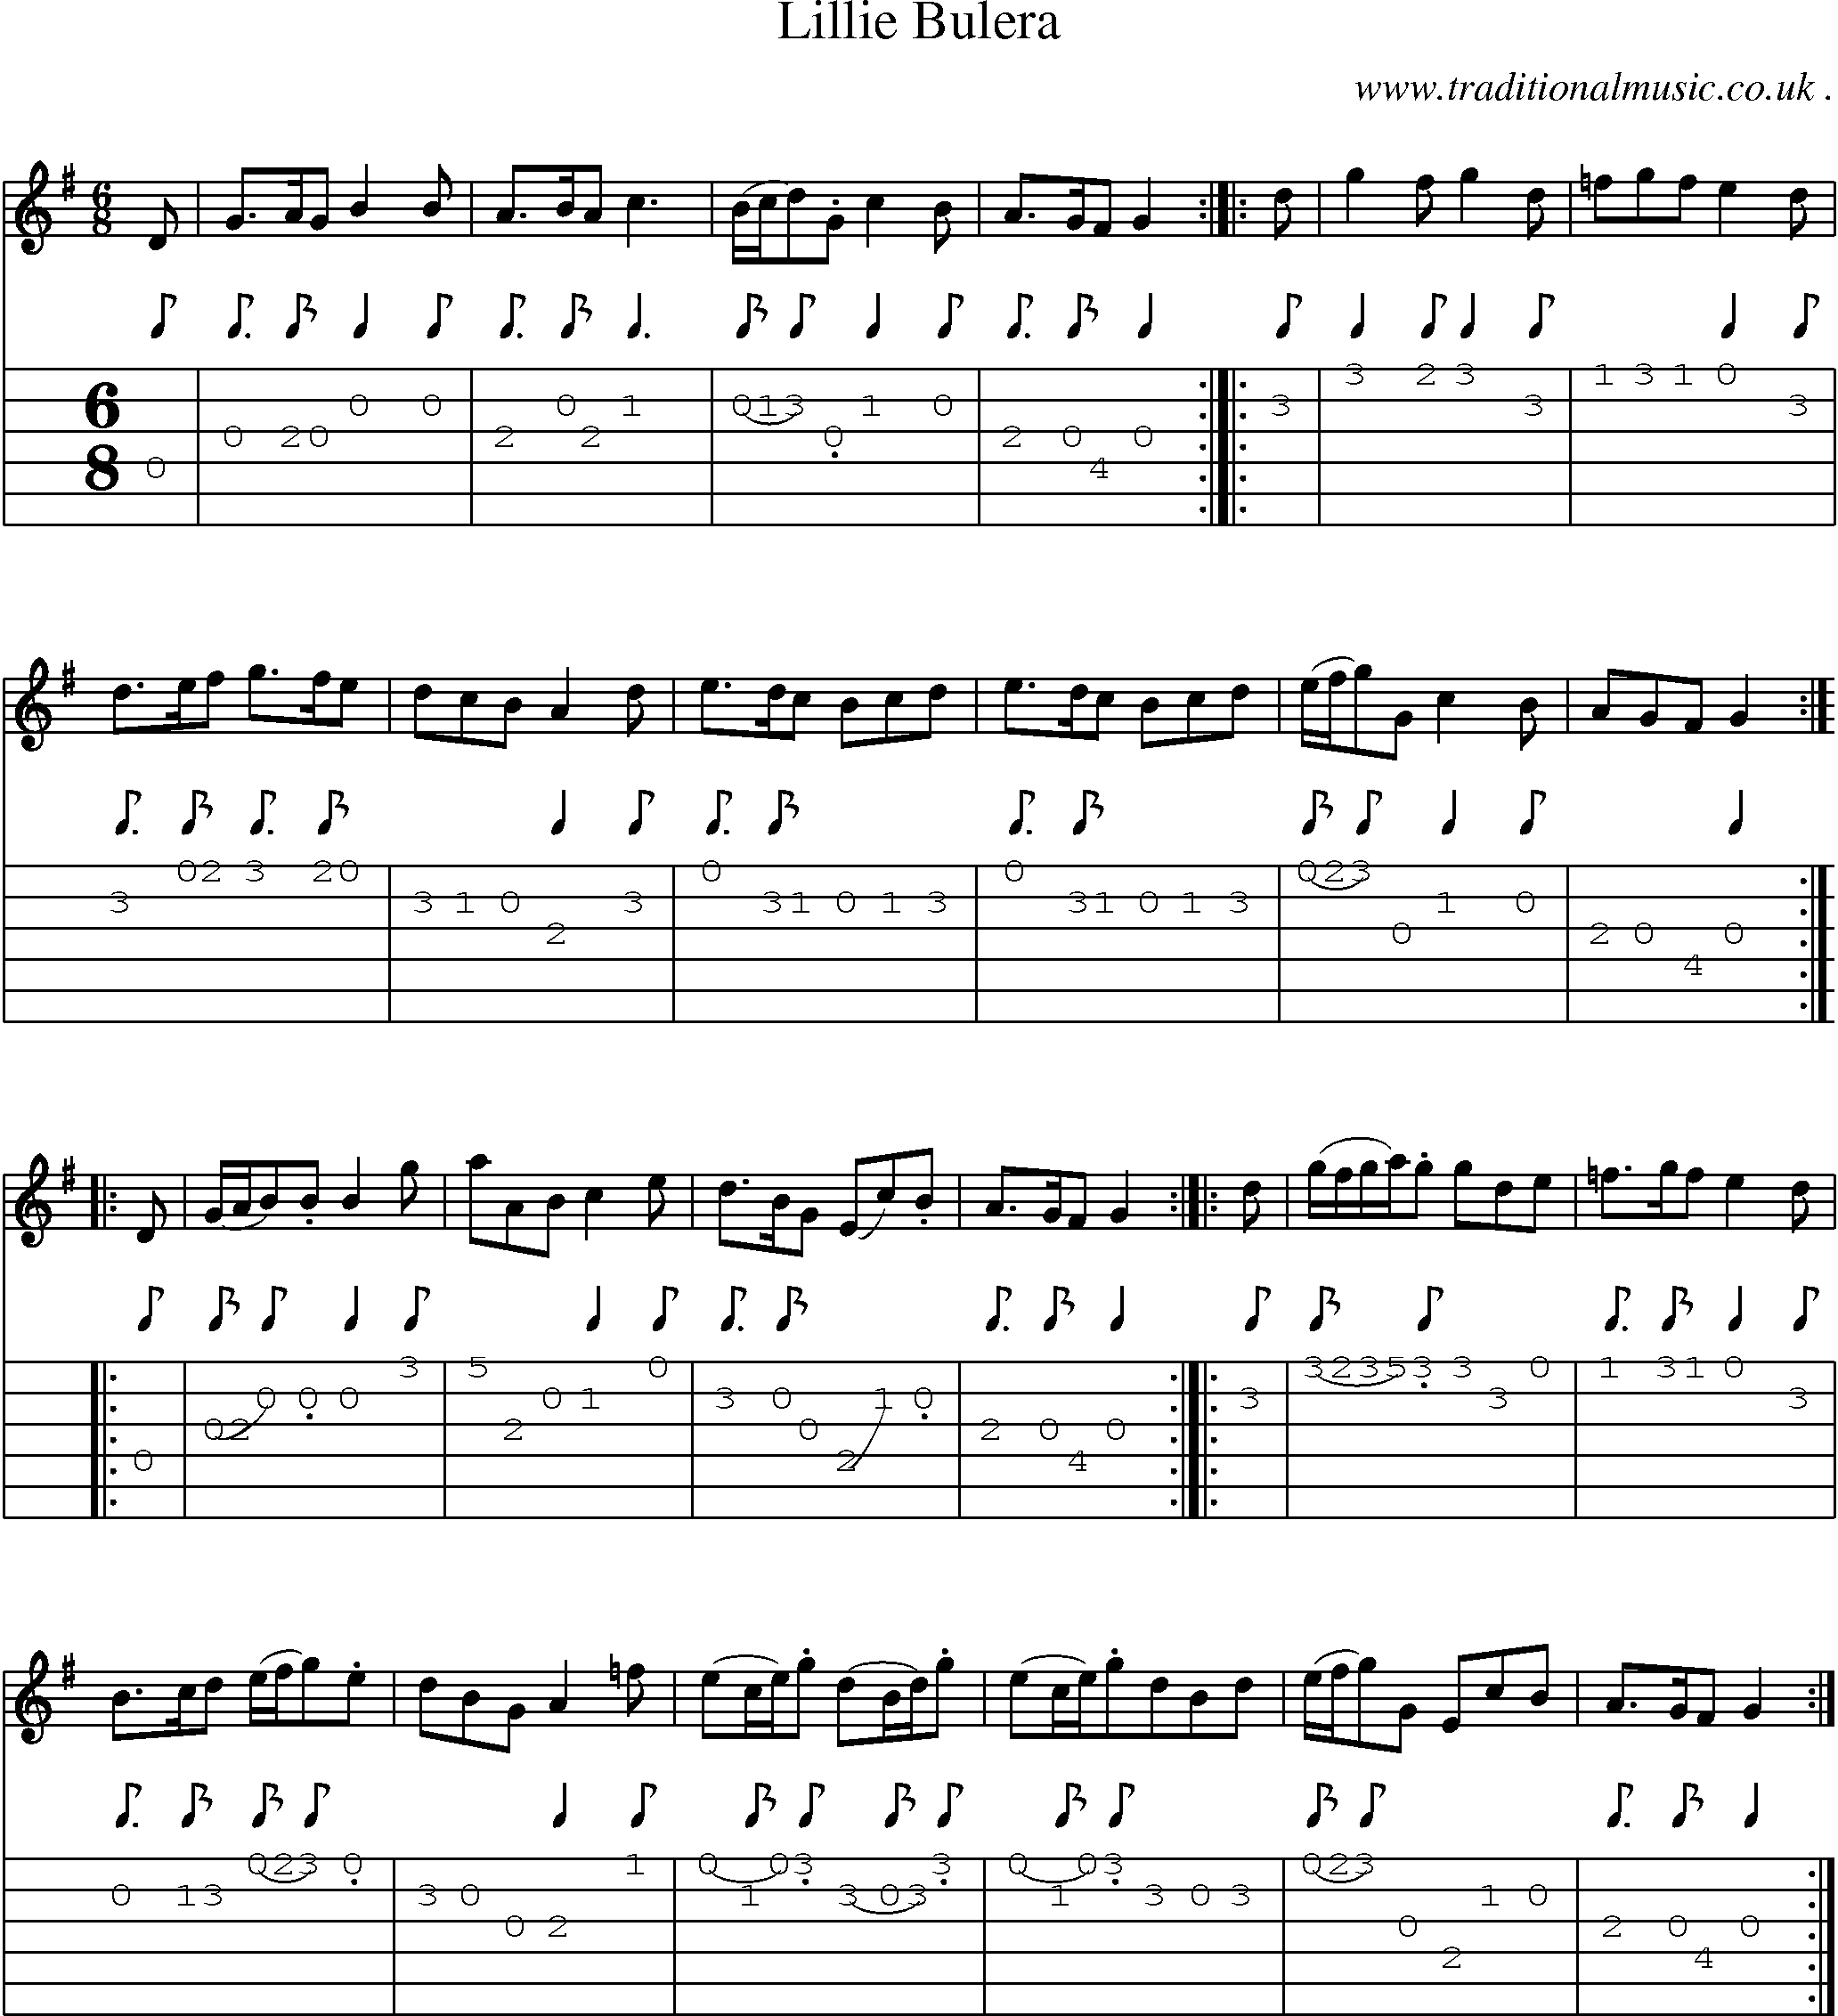 Sheet-Music and Guitar Tabs for Lillie Bulera